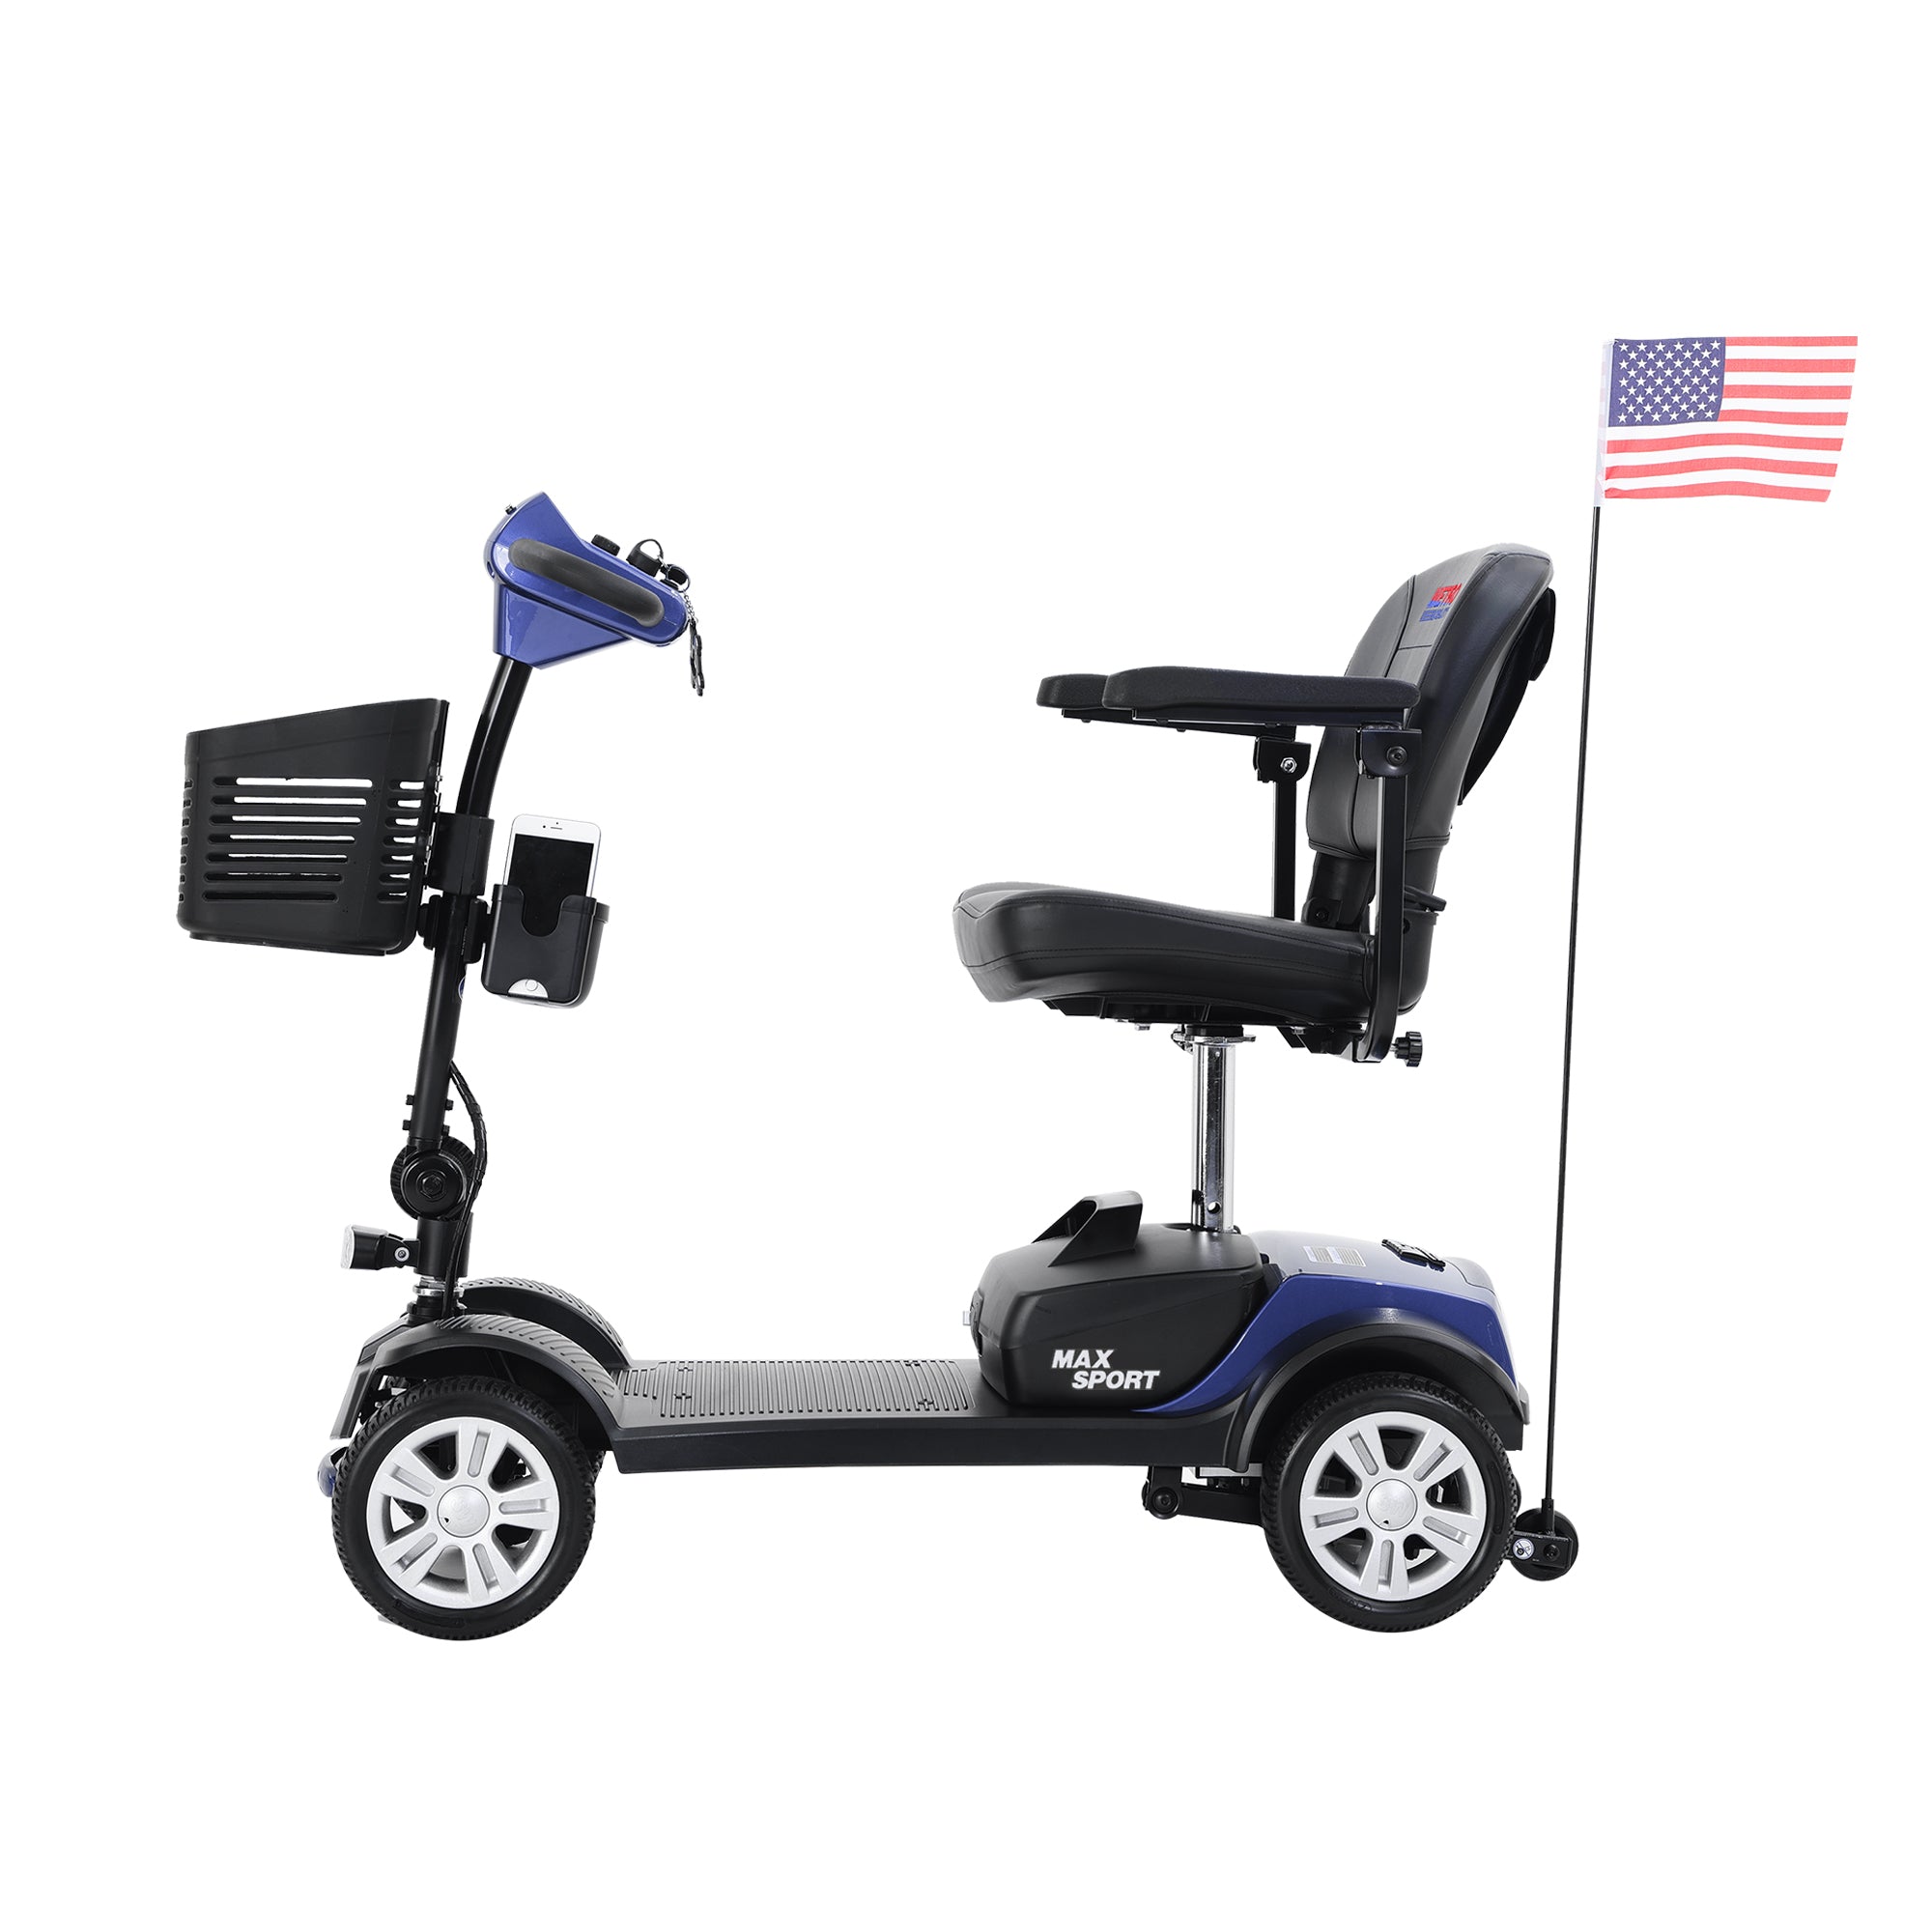 SPORT BLUE 4 Wheels Outdoor Compact Mobility Scooter with 2 in 1 Cup & Phone Holder